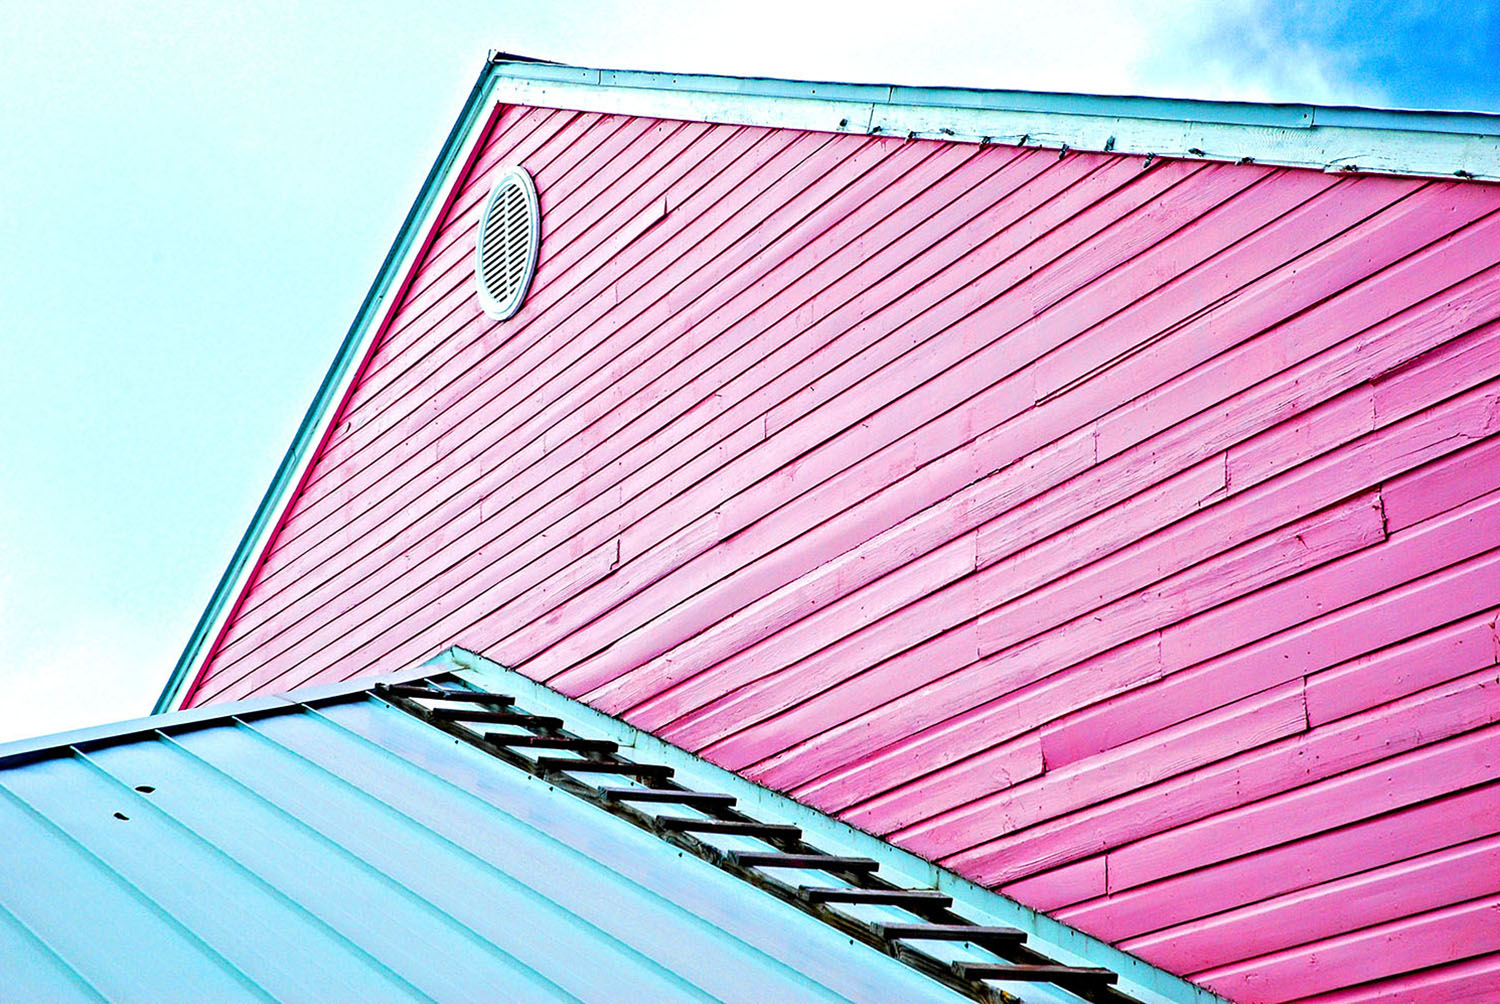 Architecture_Pink_Blue_Roof_Decor_Tourism_Travel_Vacation_Bahamas.jpg